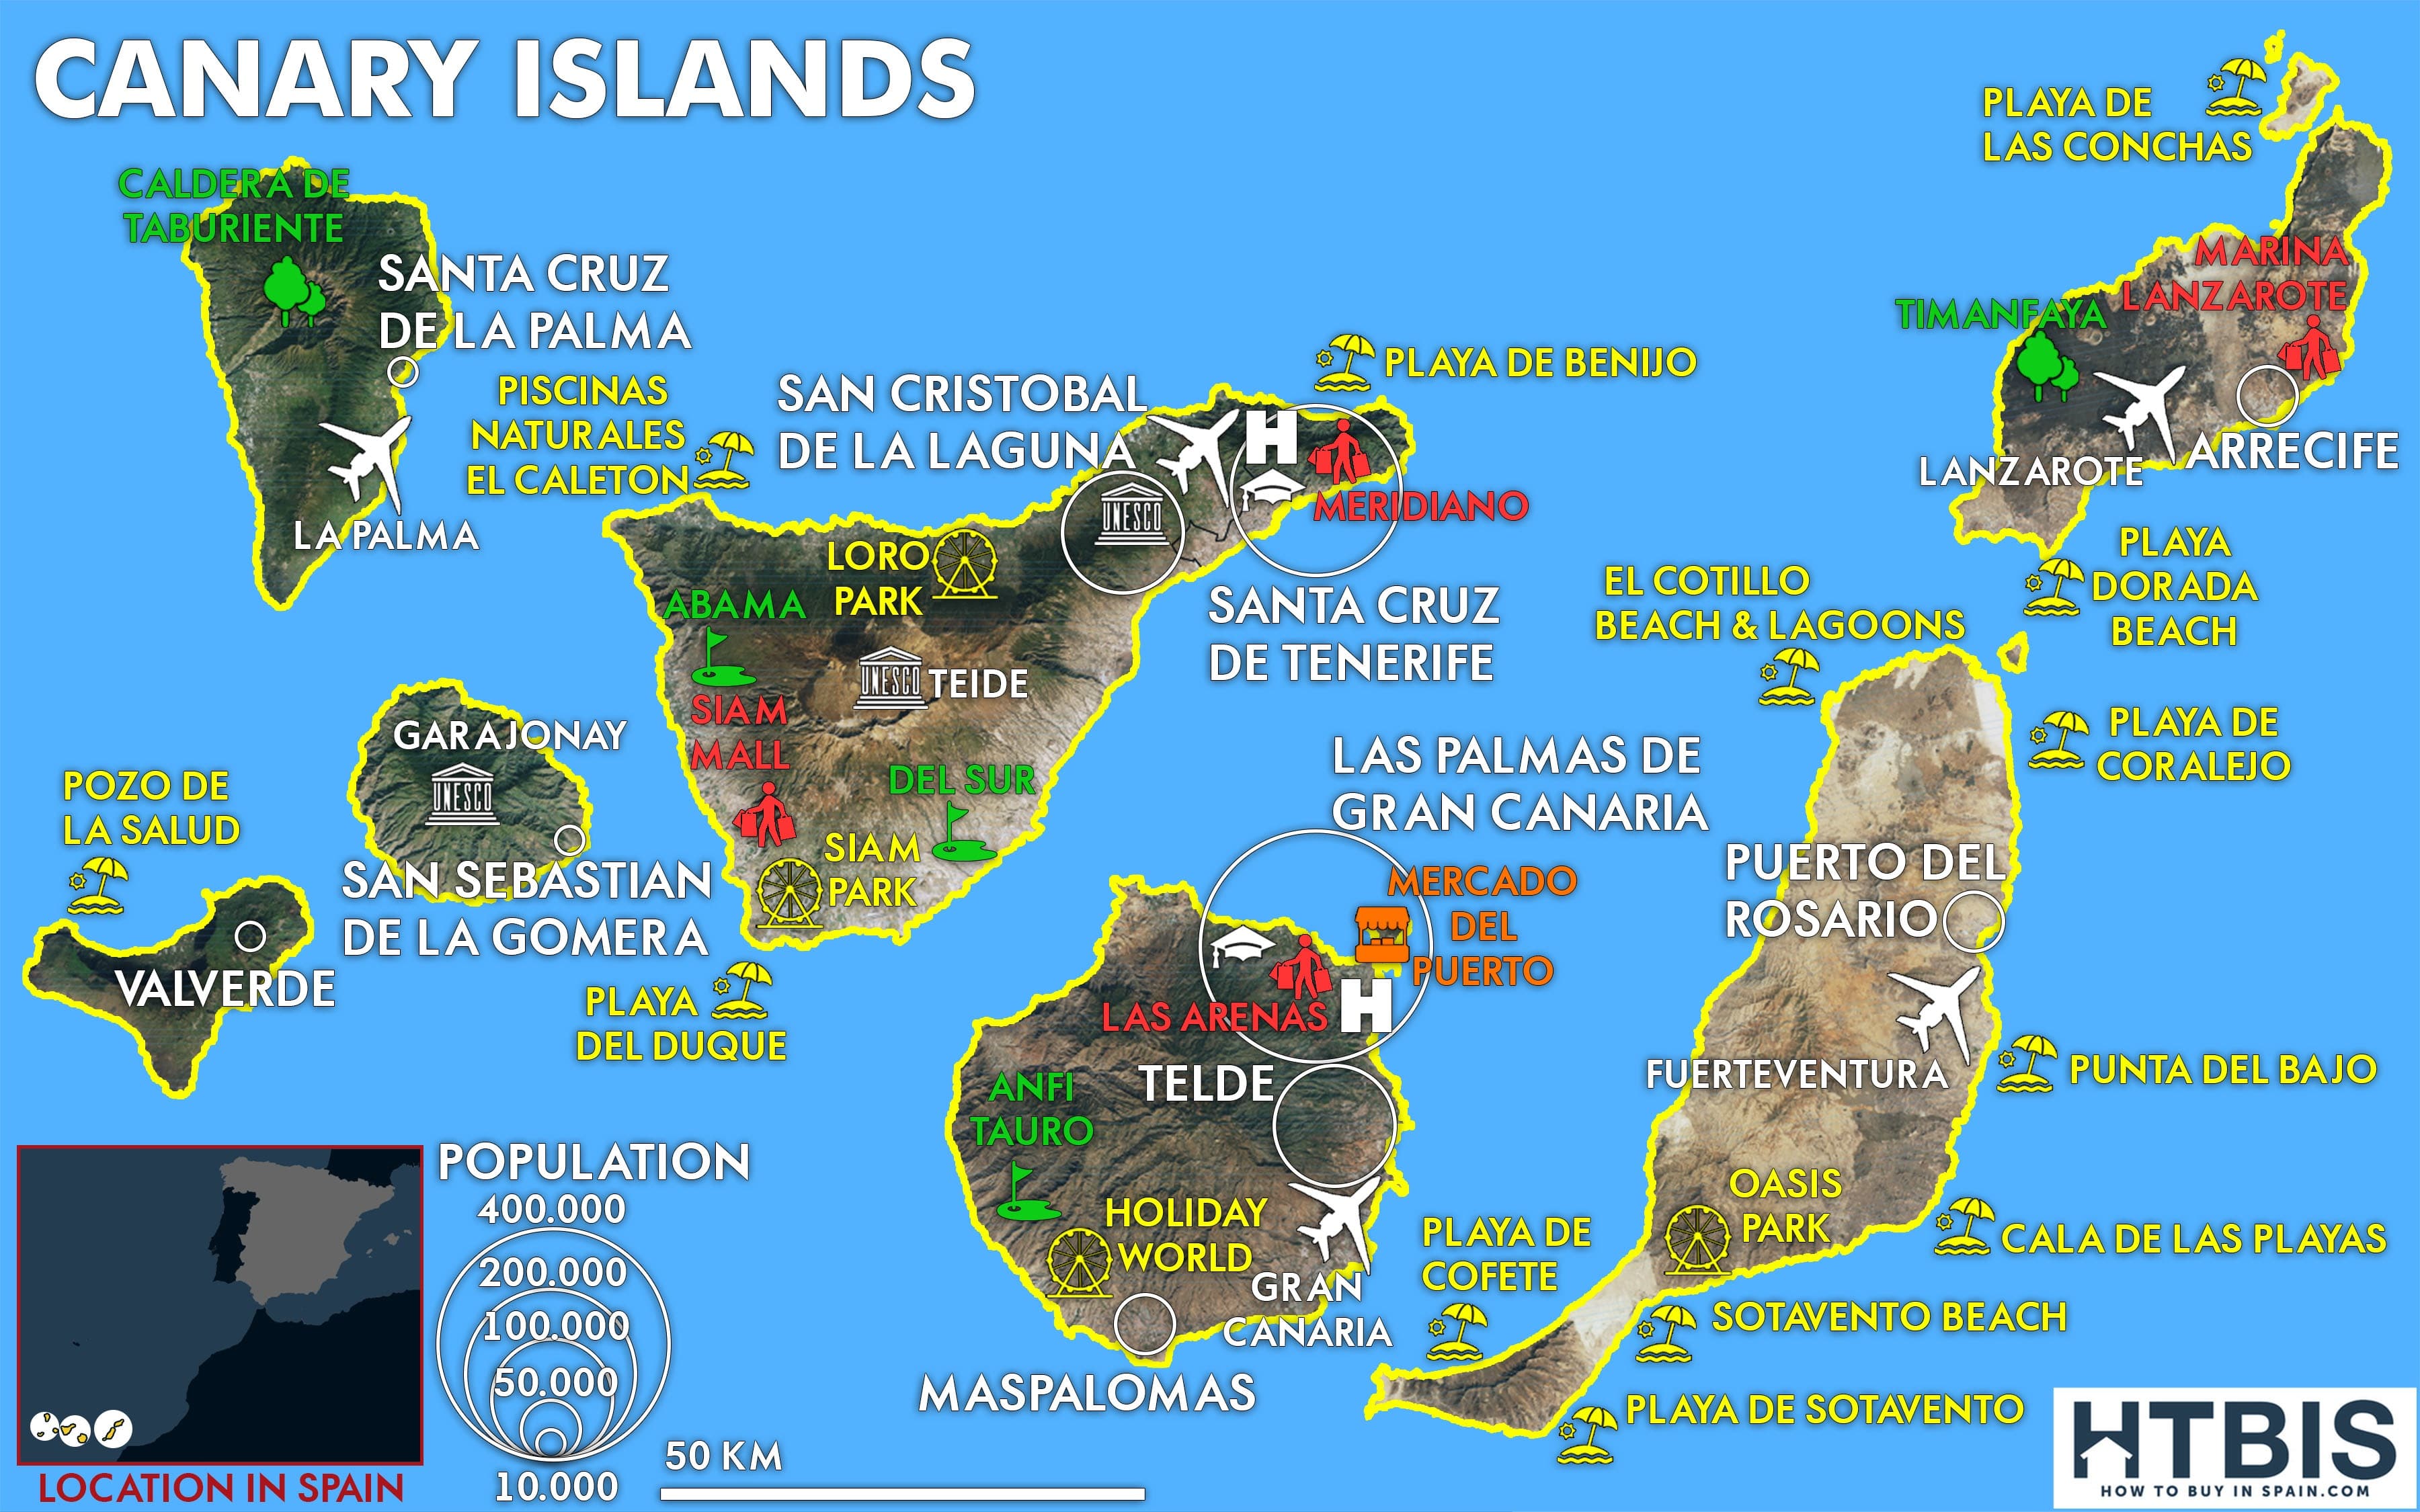 Canary Islands must see places